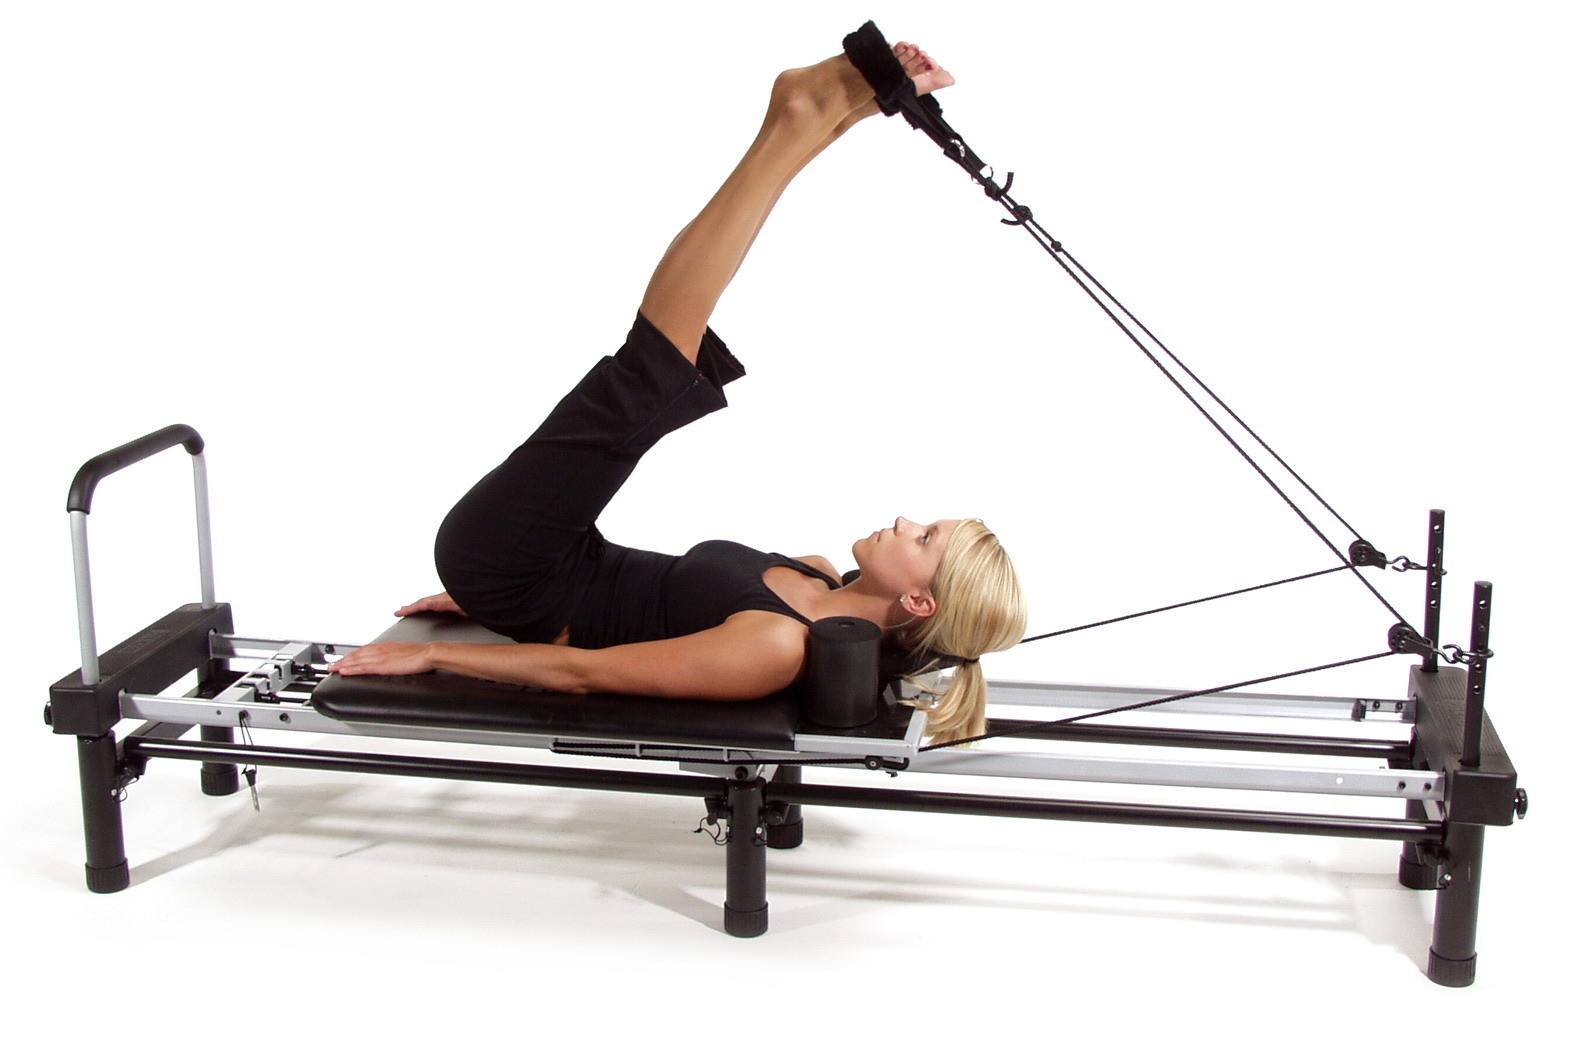 52-firsts-for-2013-week-12-my-first-pilates-reformer-experience